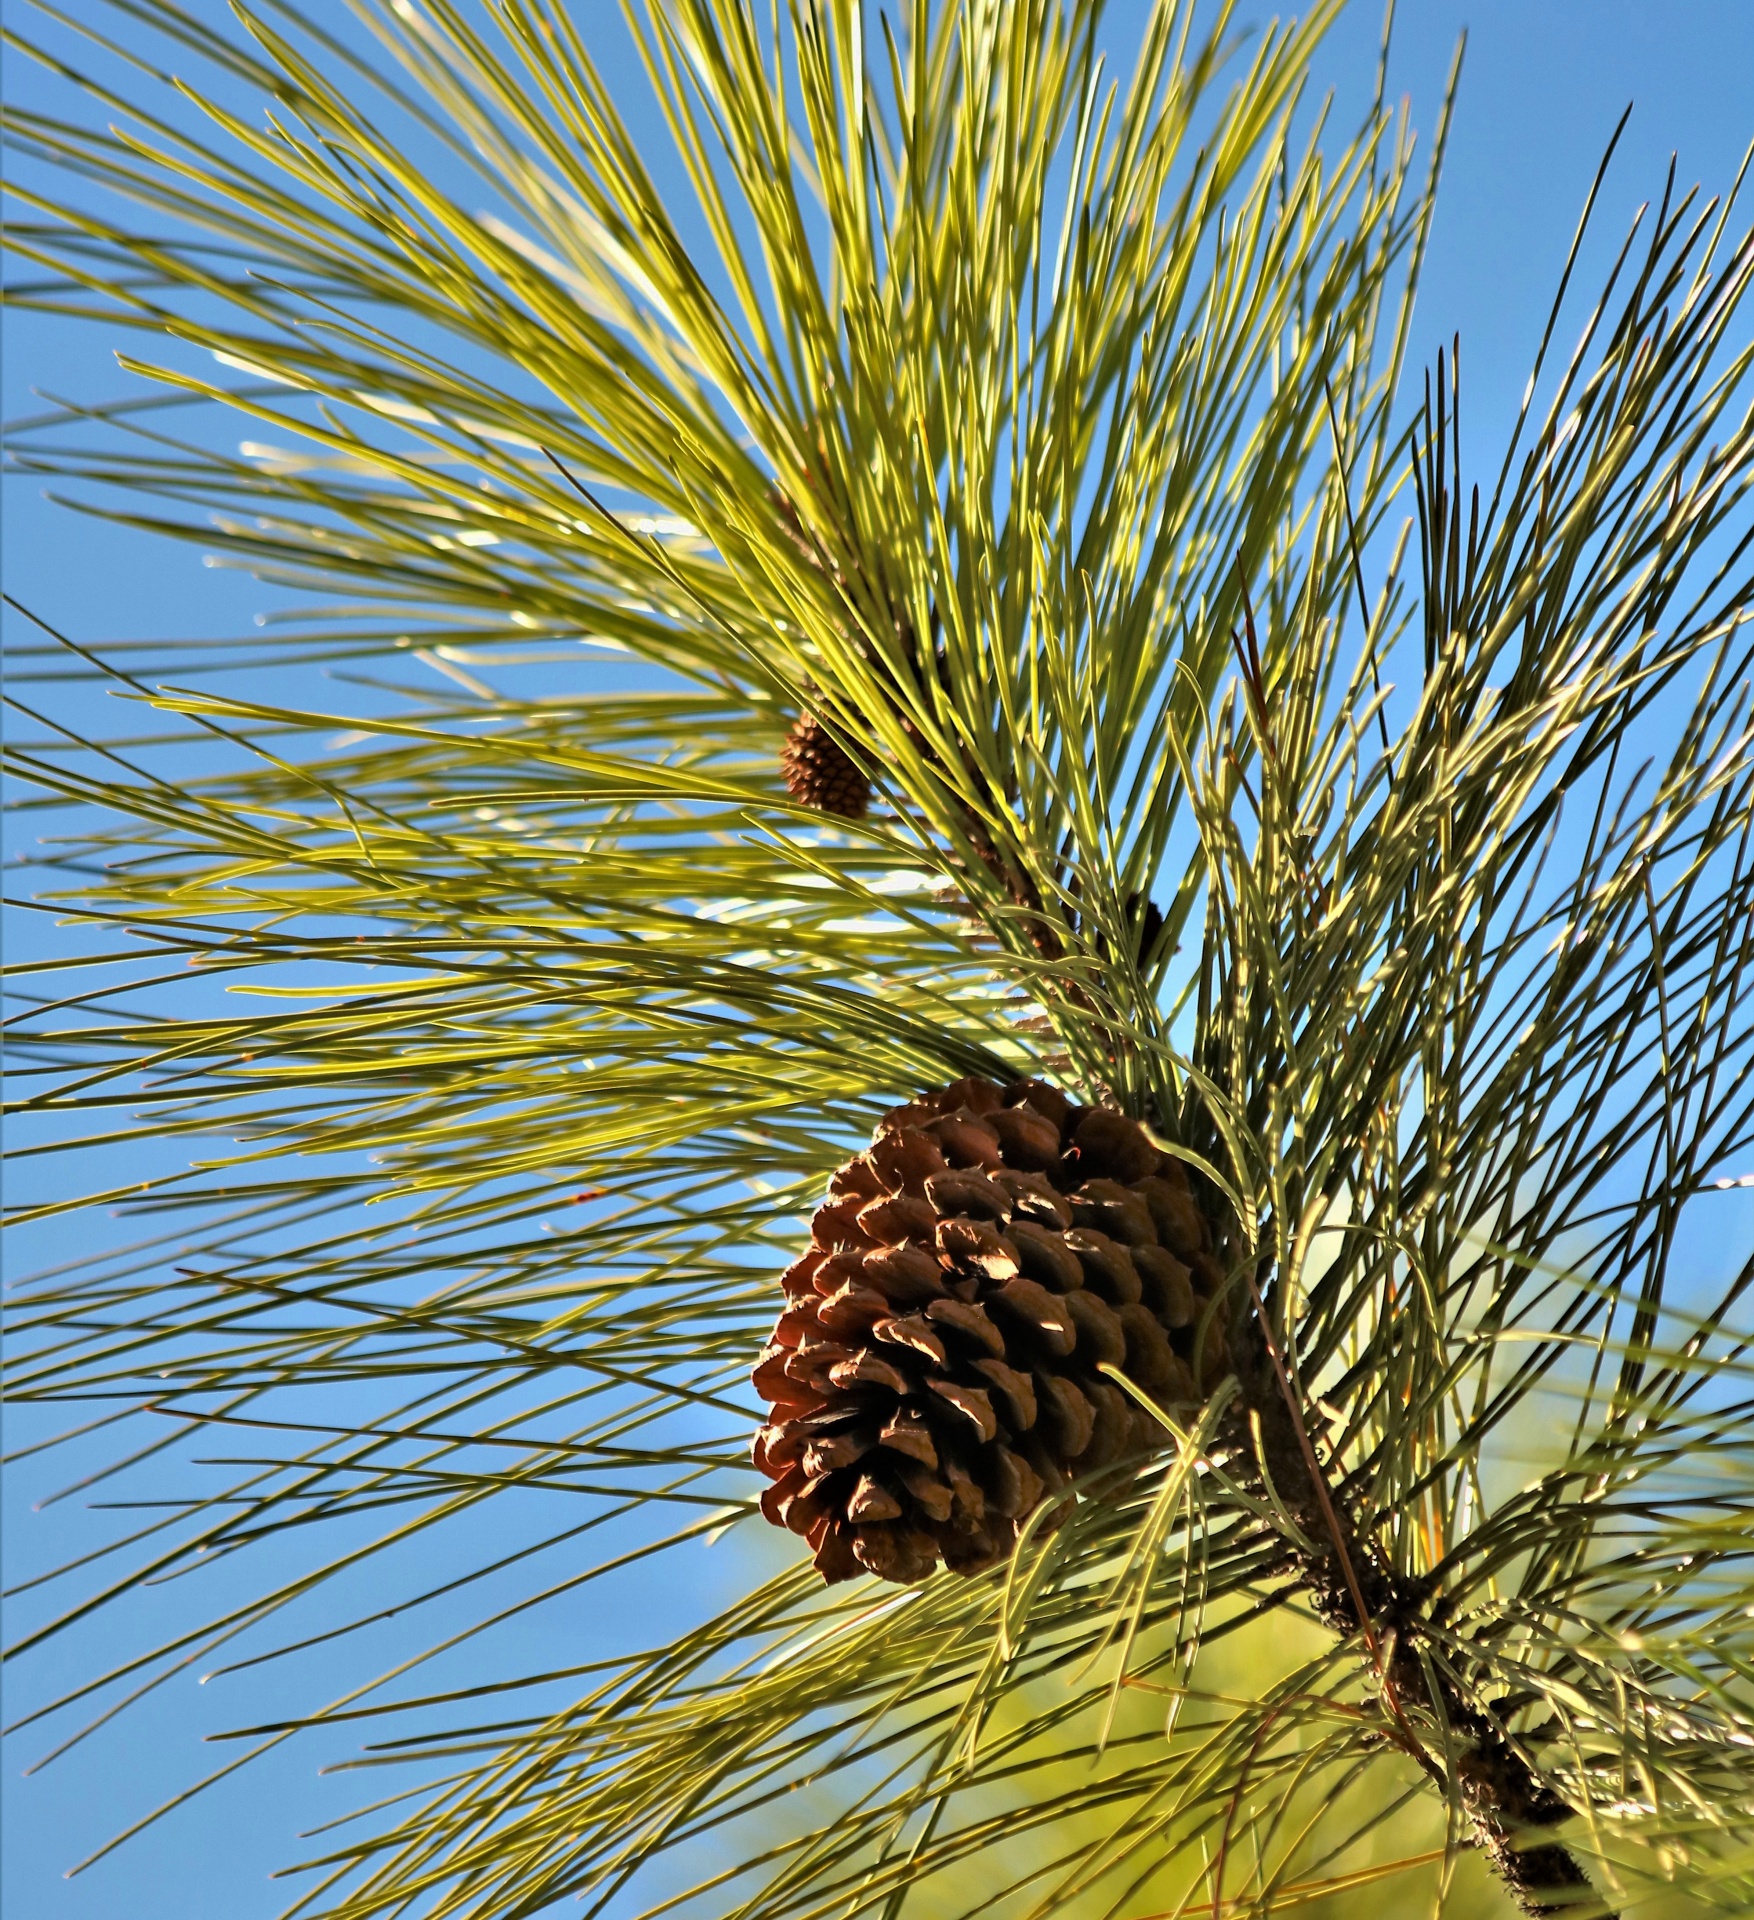 Close-up of a pine cone hanging on pine tree and surrounded by green pine needles, against a blue sky.